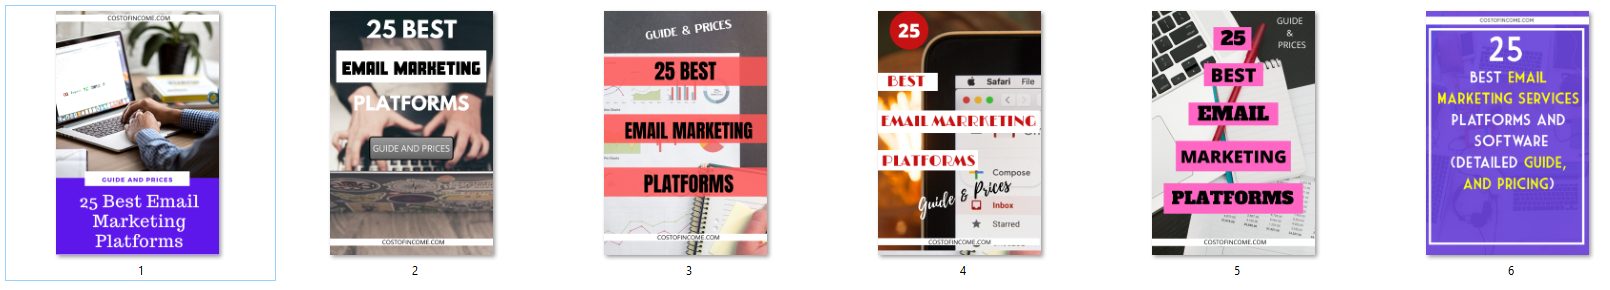 7 First Class Tips to Increase Your Pinterest CTR to Boost Sales & Readership